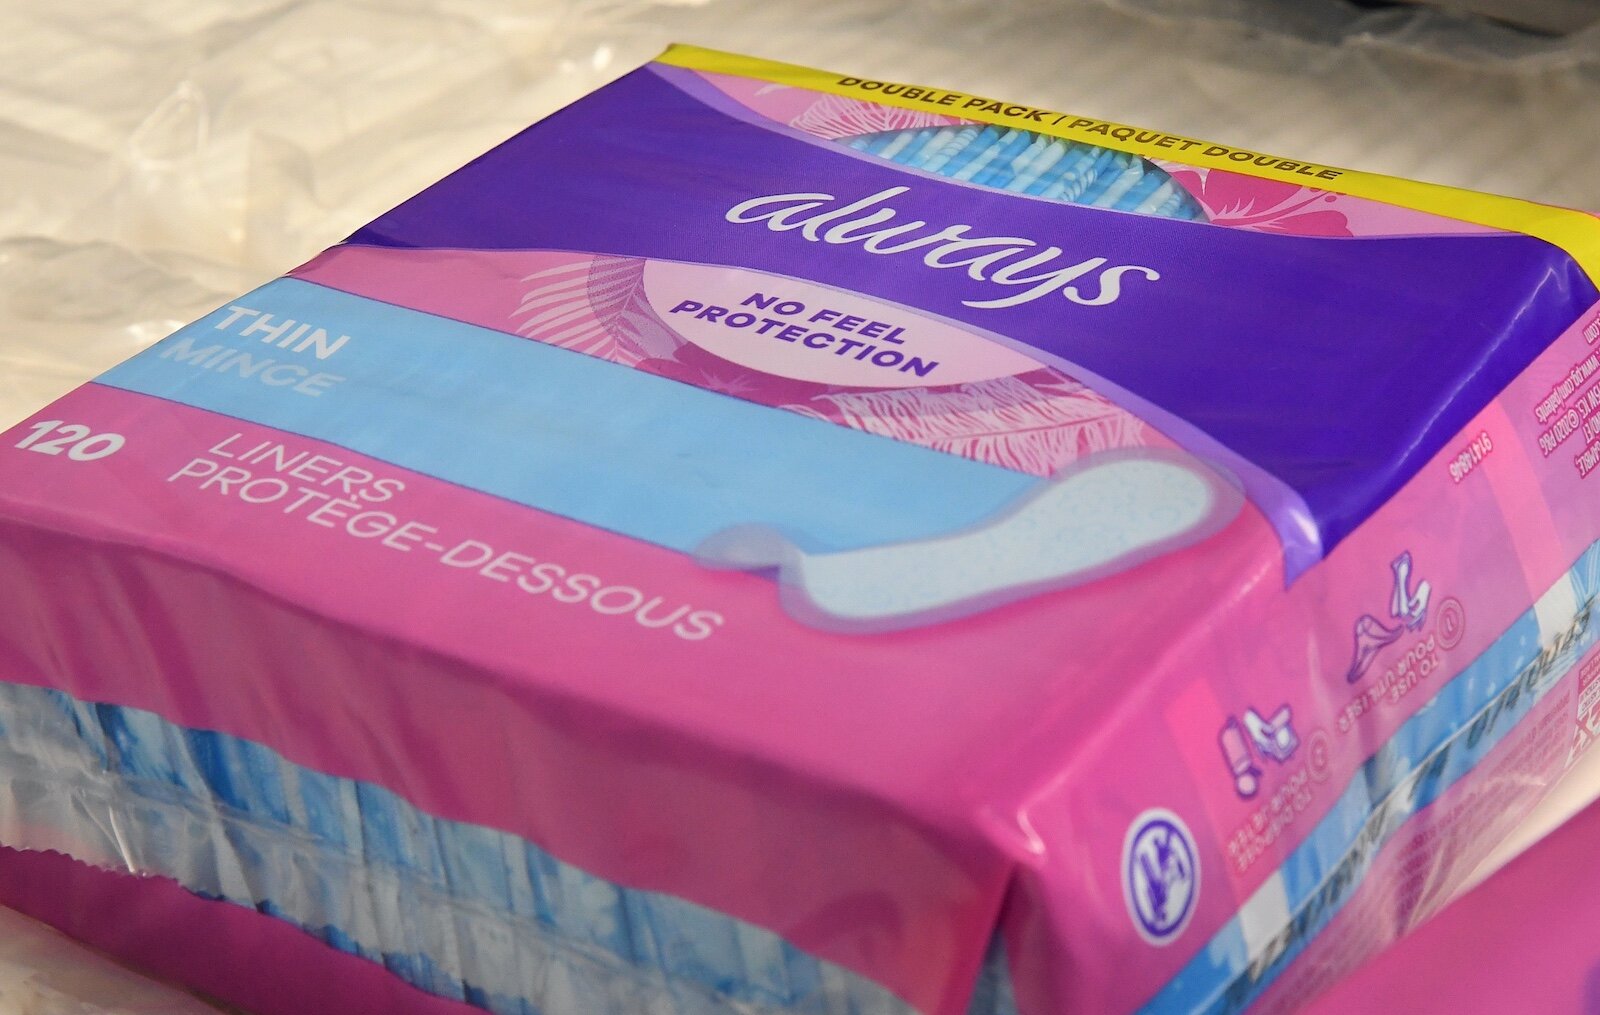 Free feminine hygiene products are available at the Charitable Union.